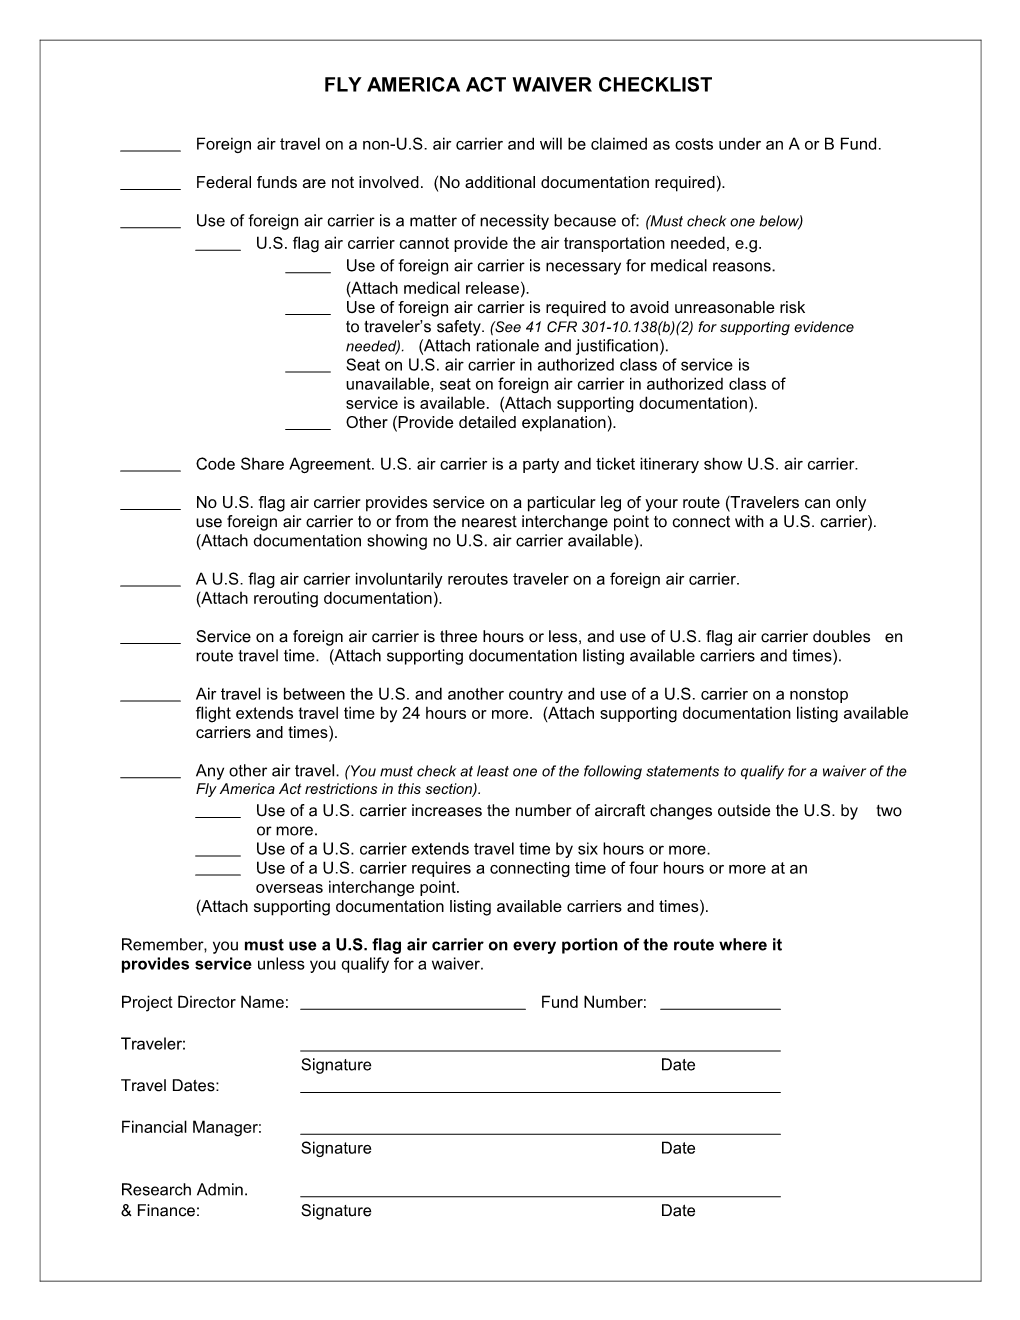 Fly America Act Waiver Checklist